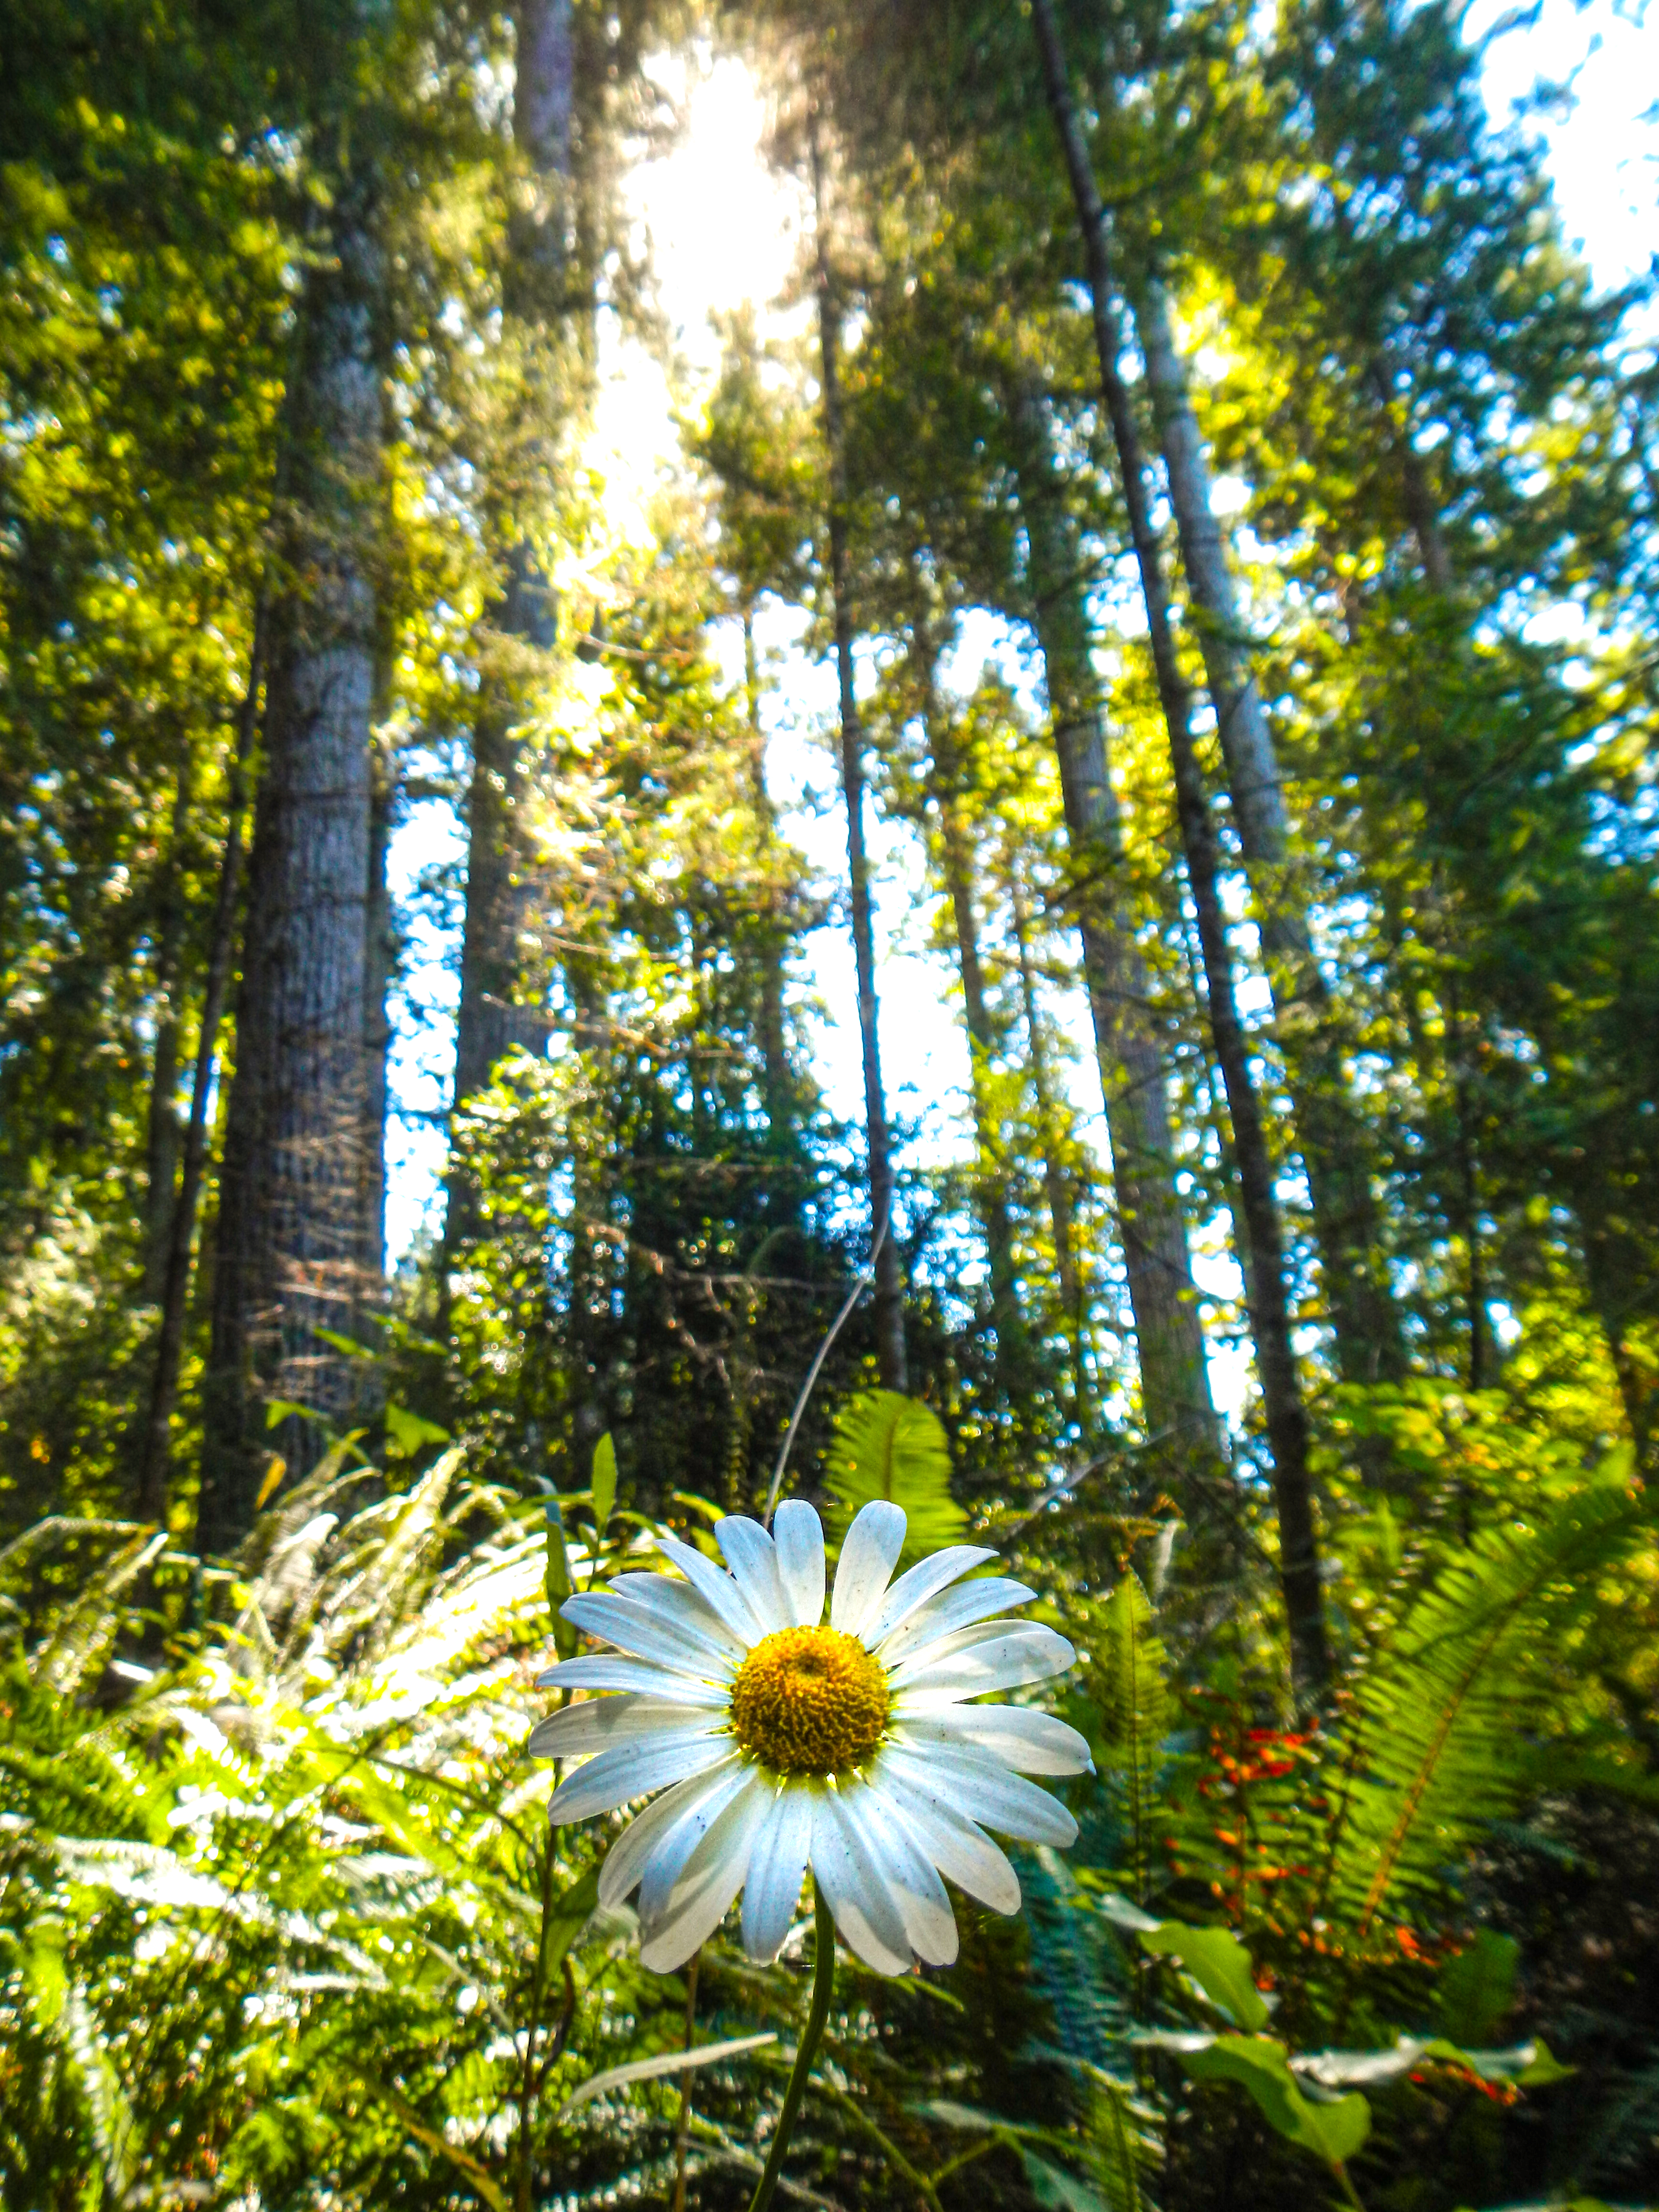 An illuminated white flower surrounded by lush ferns and towering redwoods with light cast from behind.